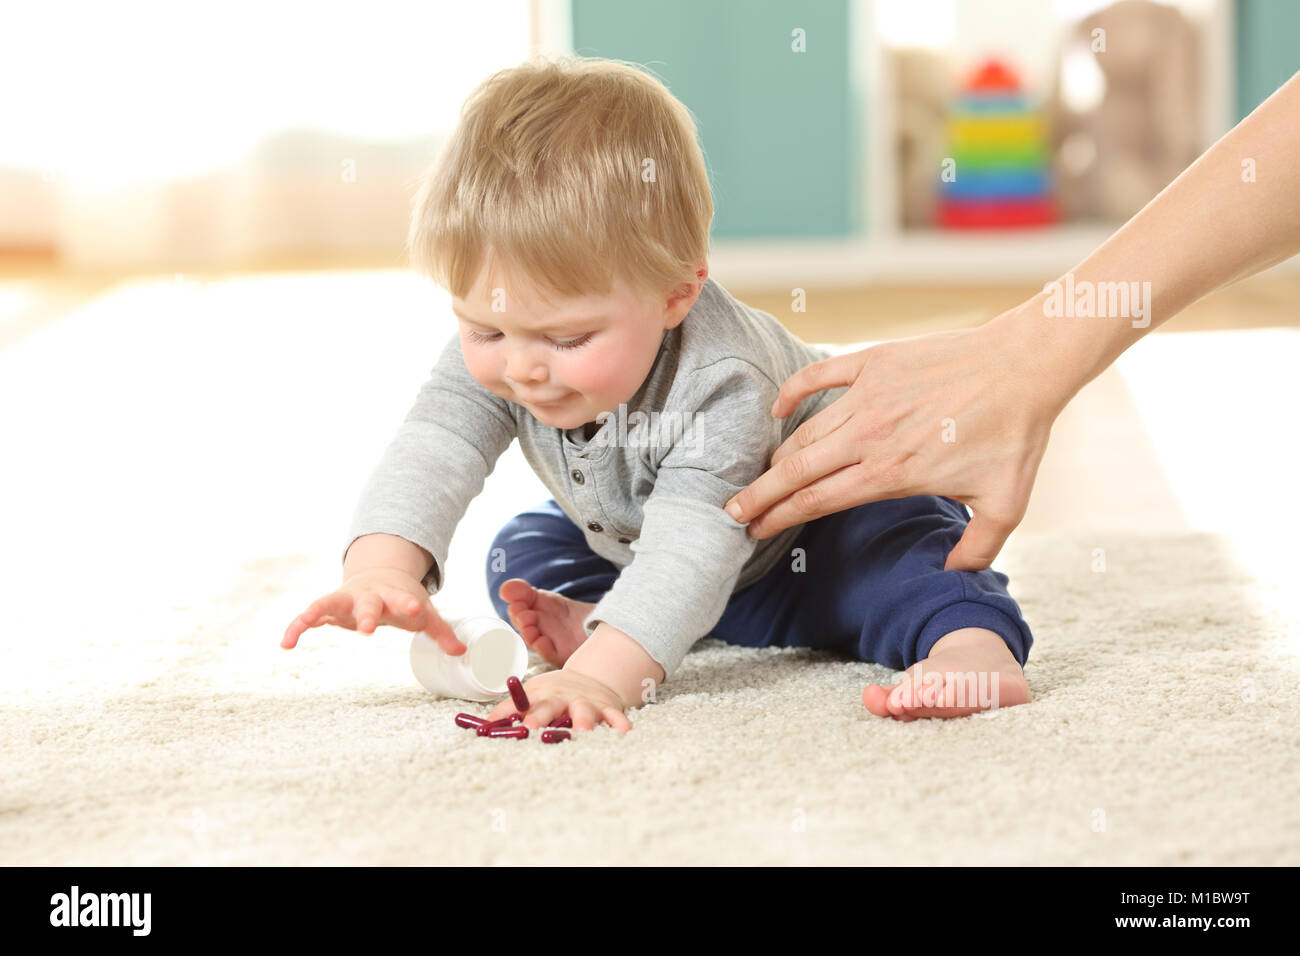 Mother hand preventing the baby from eating pills on the flor at home Stock Photo